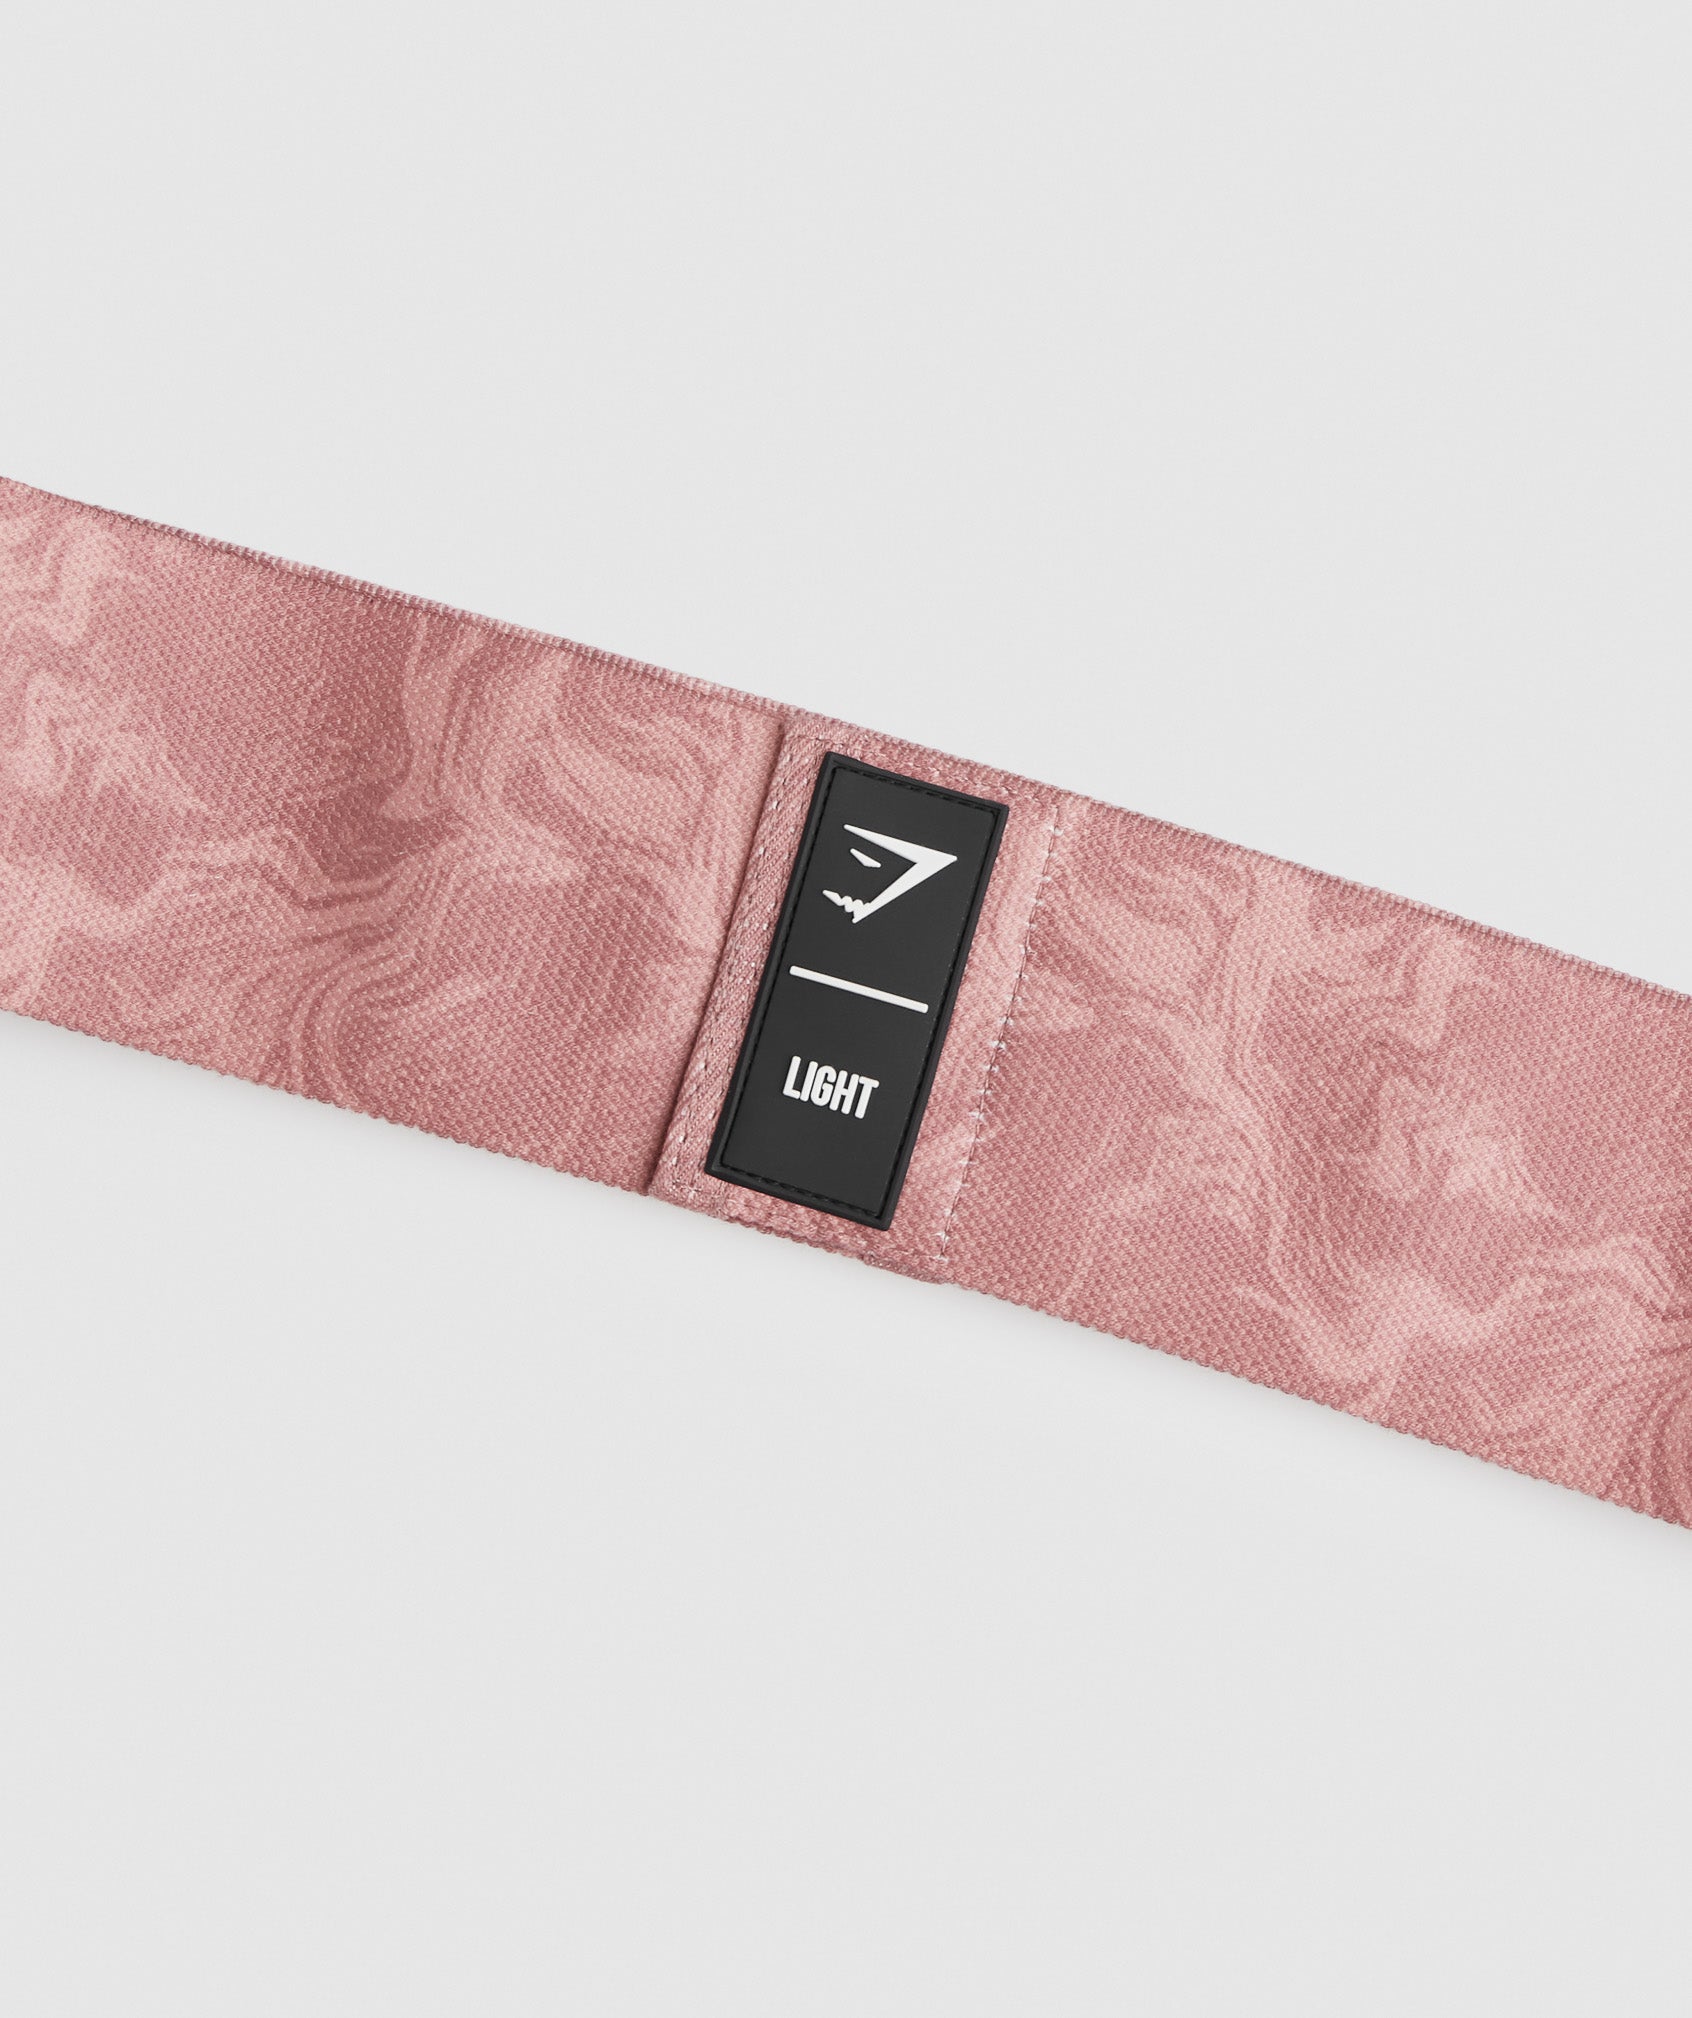 Light Glute Band in Alice Pink Print